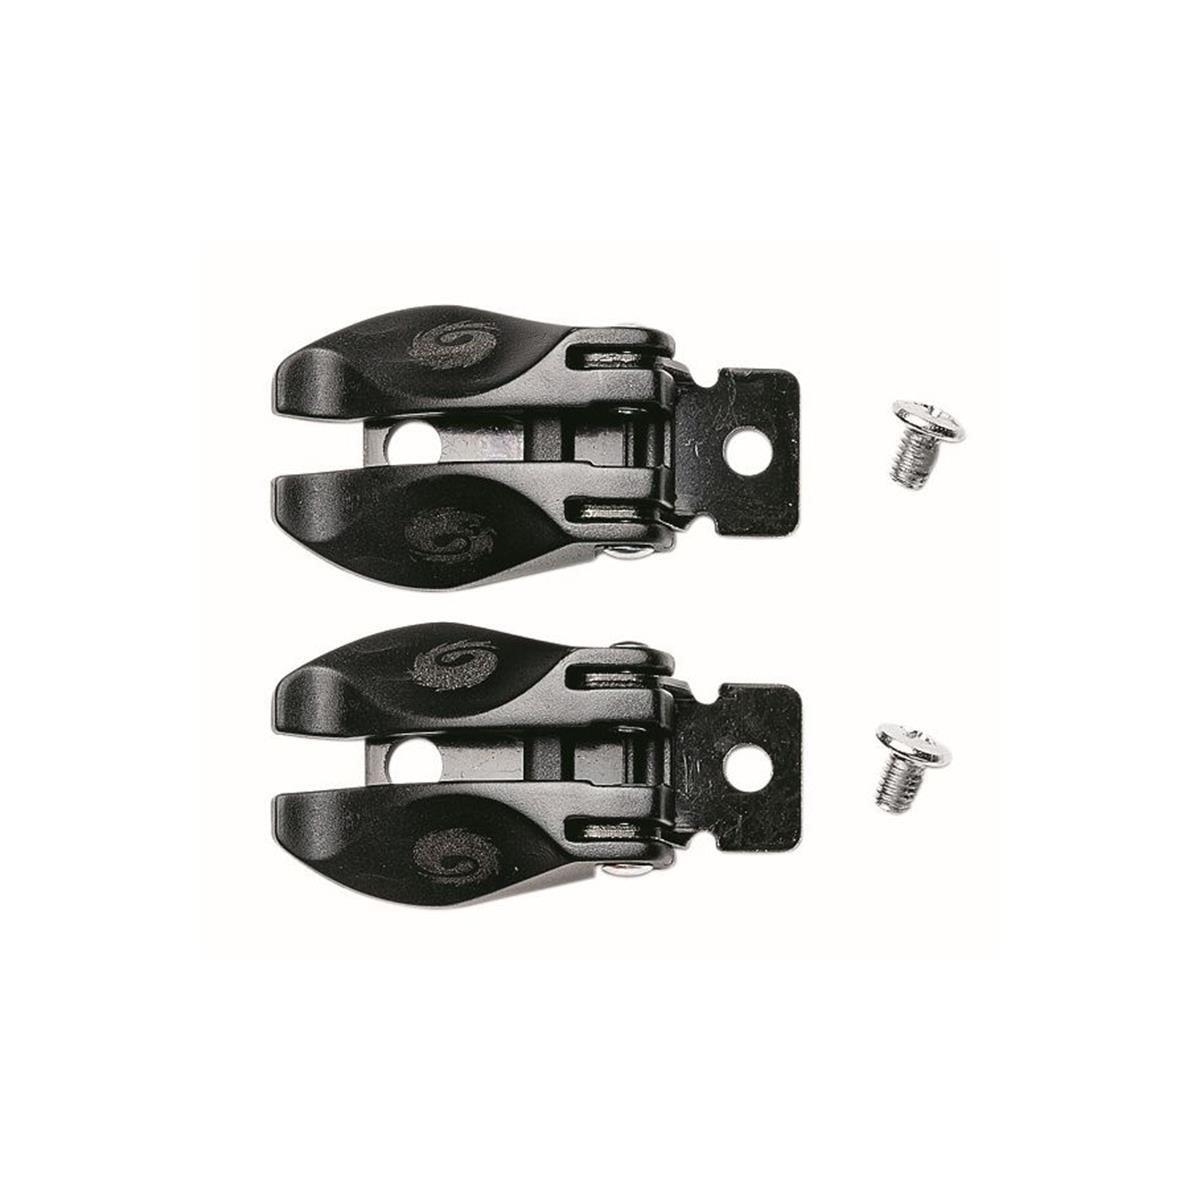 Sidi Replacement Buckle Kit Crossfire / Agueda / Stinger / X-3 / Trial Black